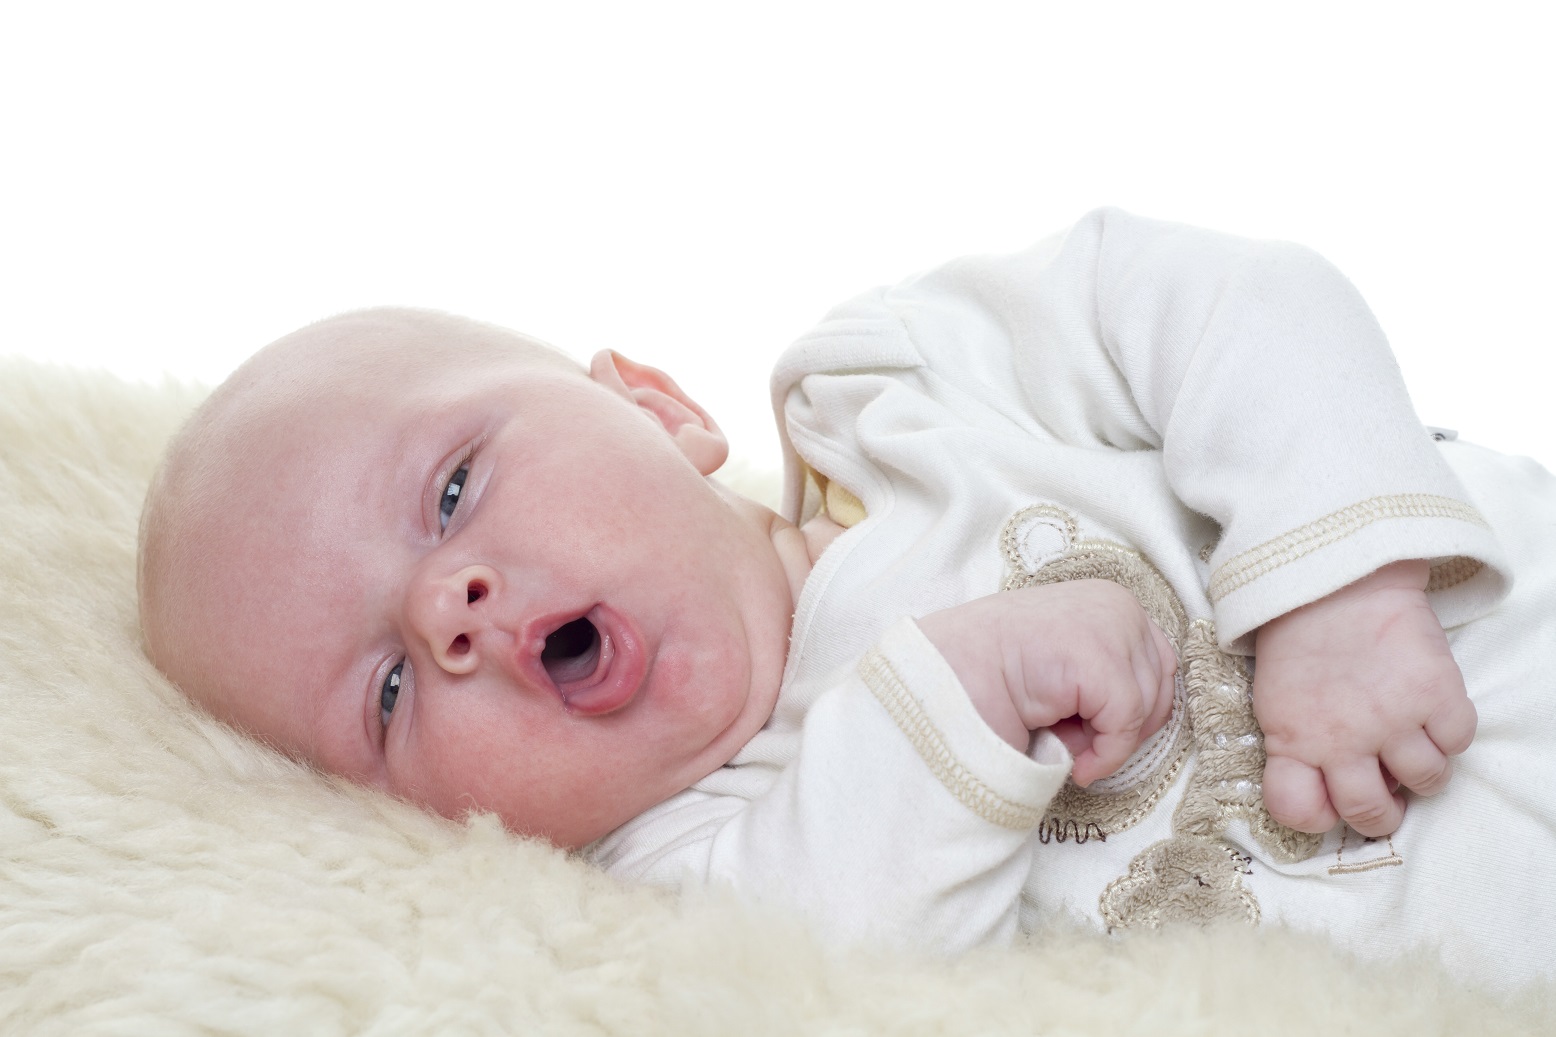 How Do I Know if My Baby Has Pertussis?  The Pulse